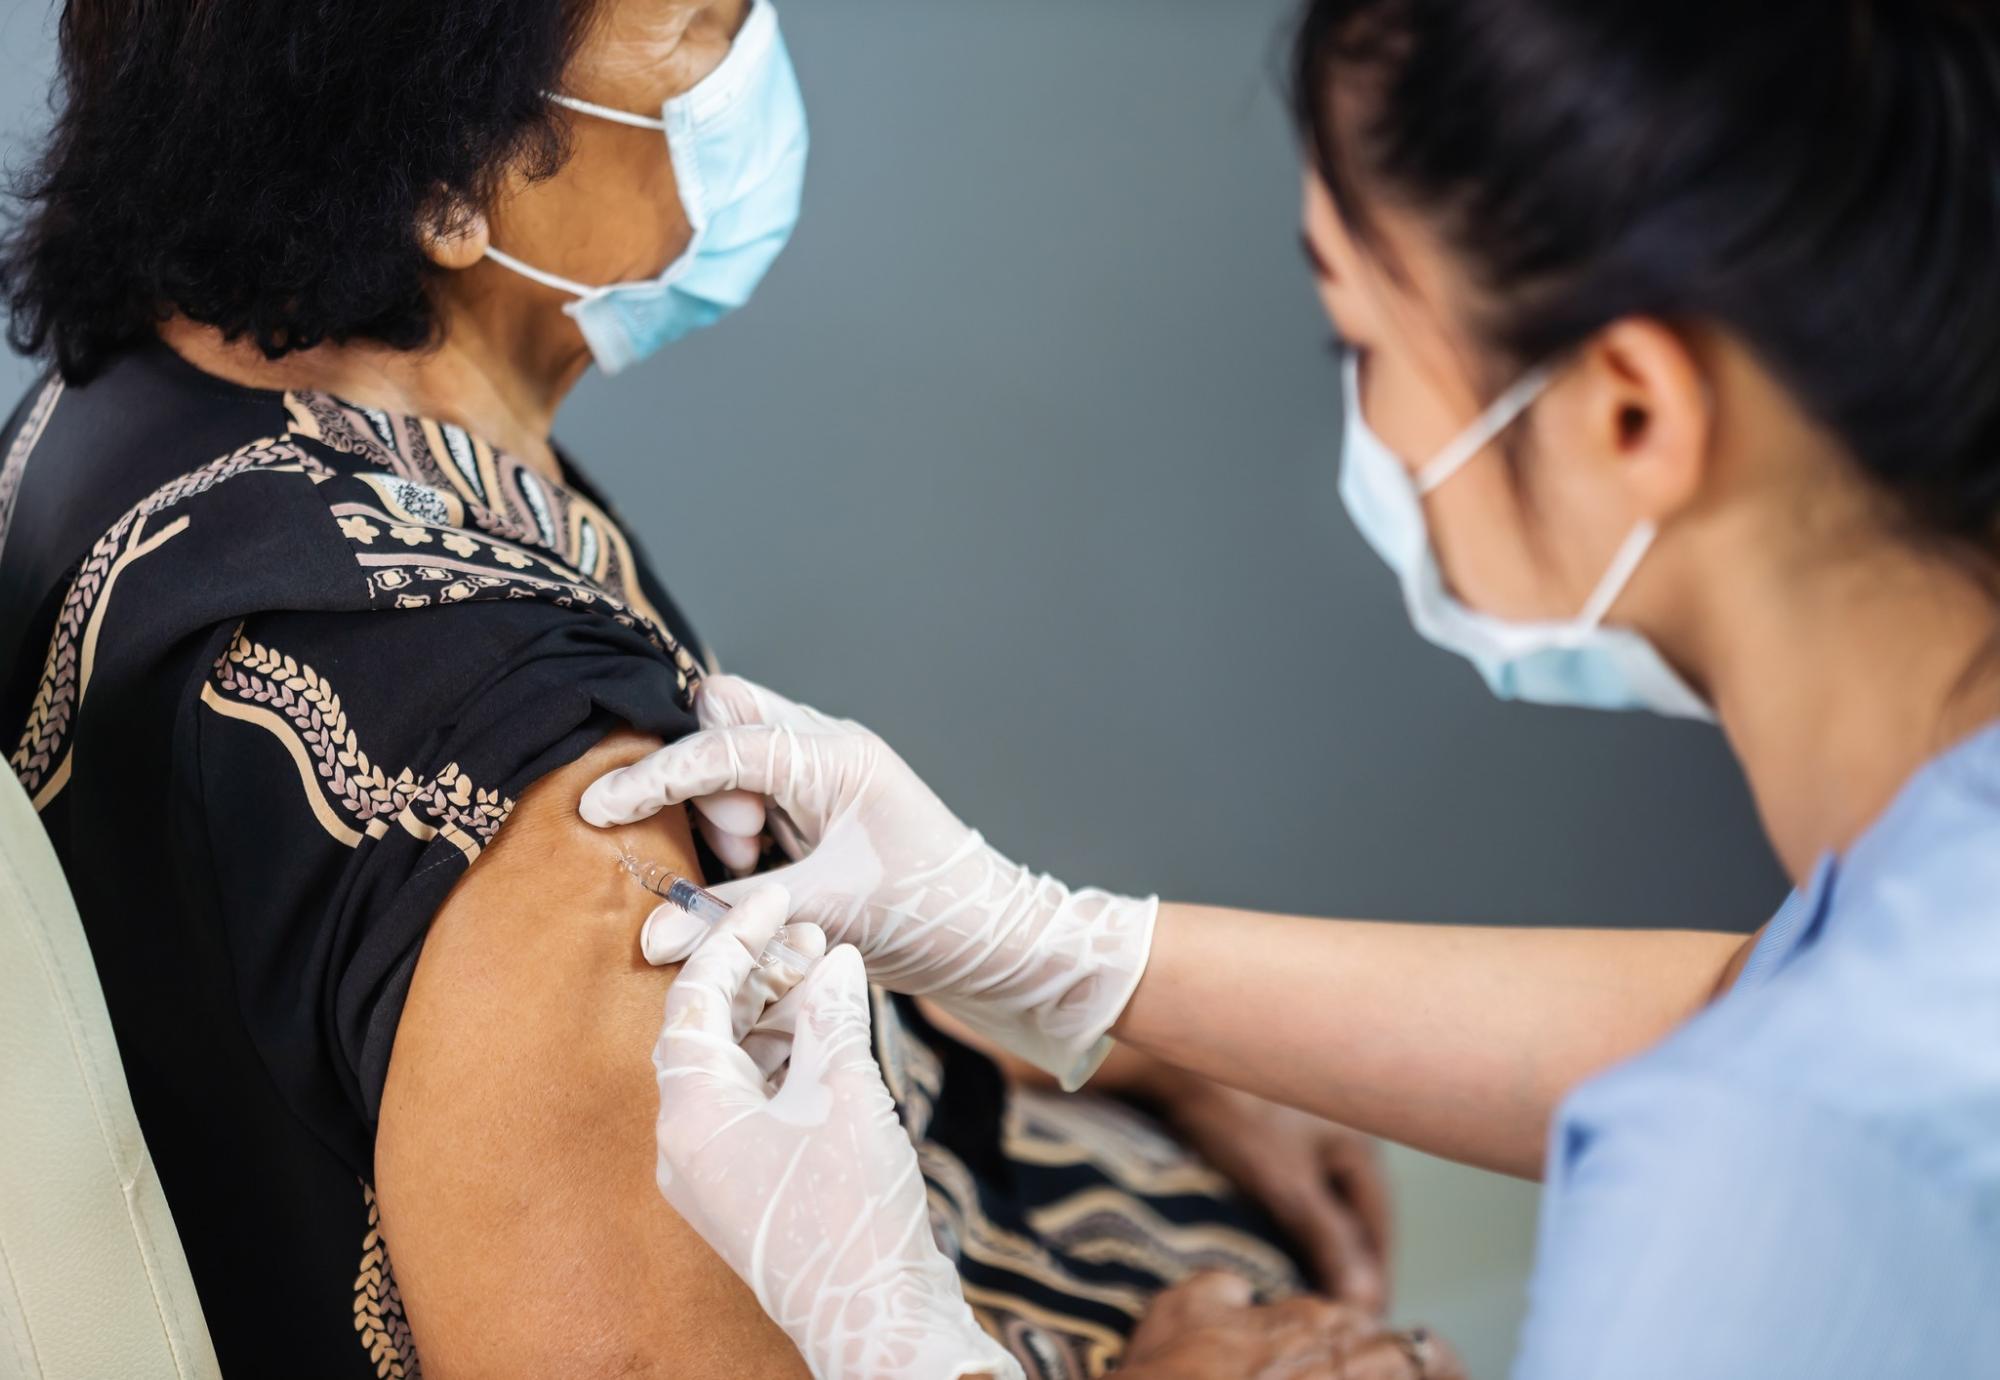 Health professional administering vaccine jab to a patient